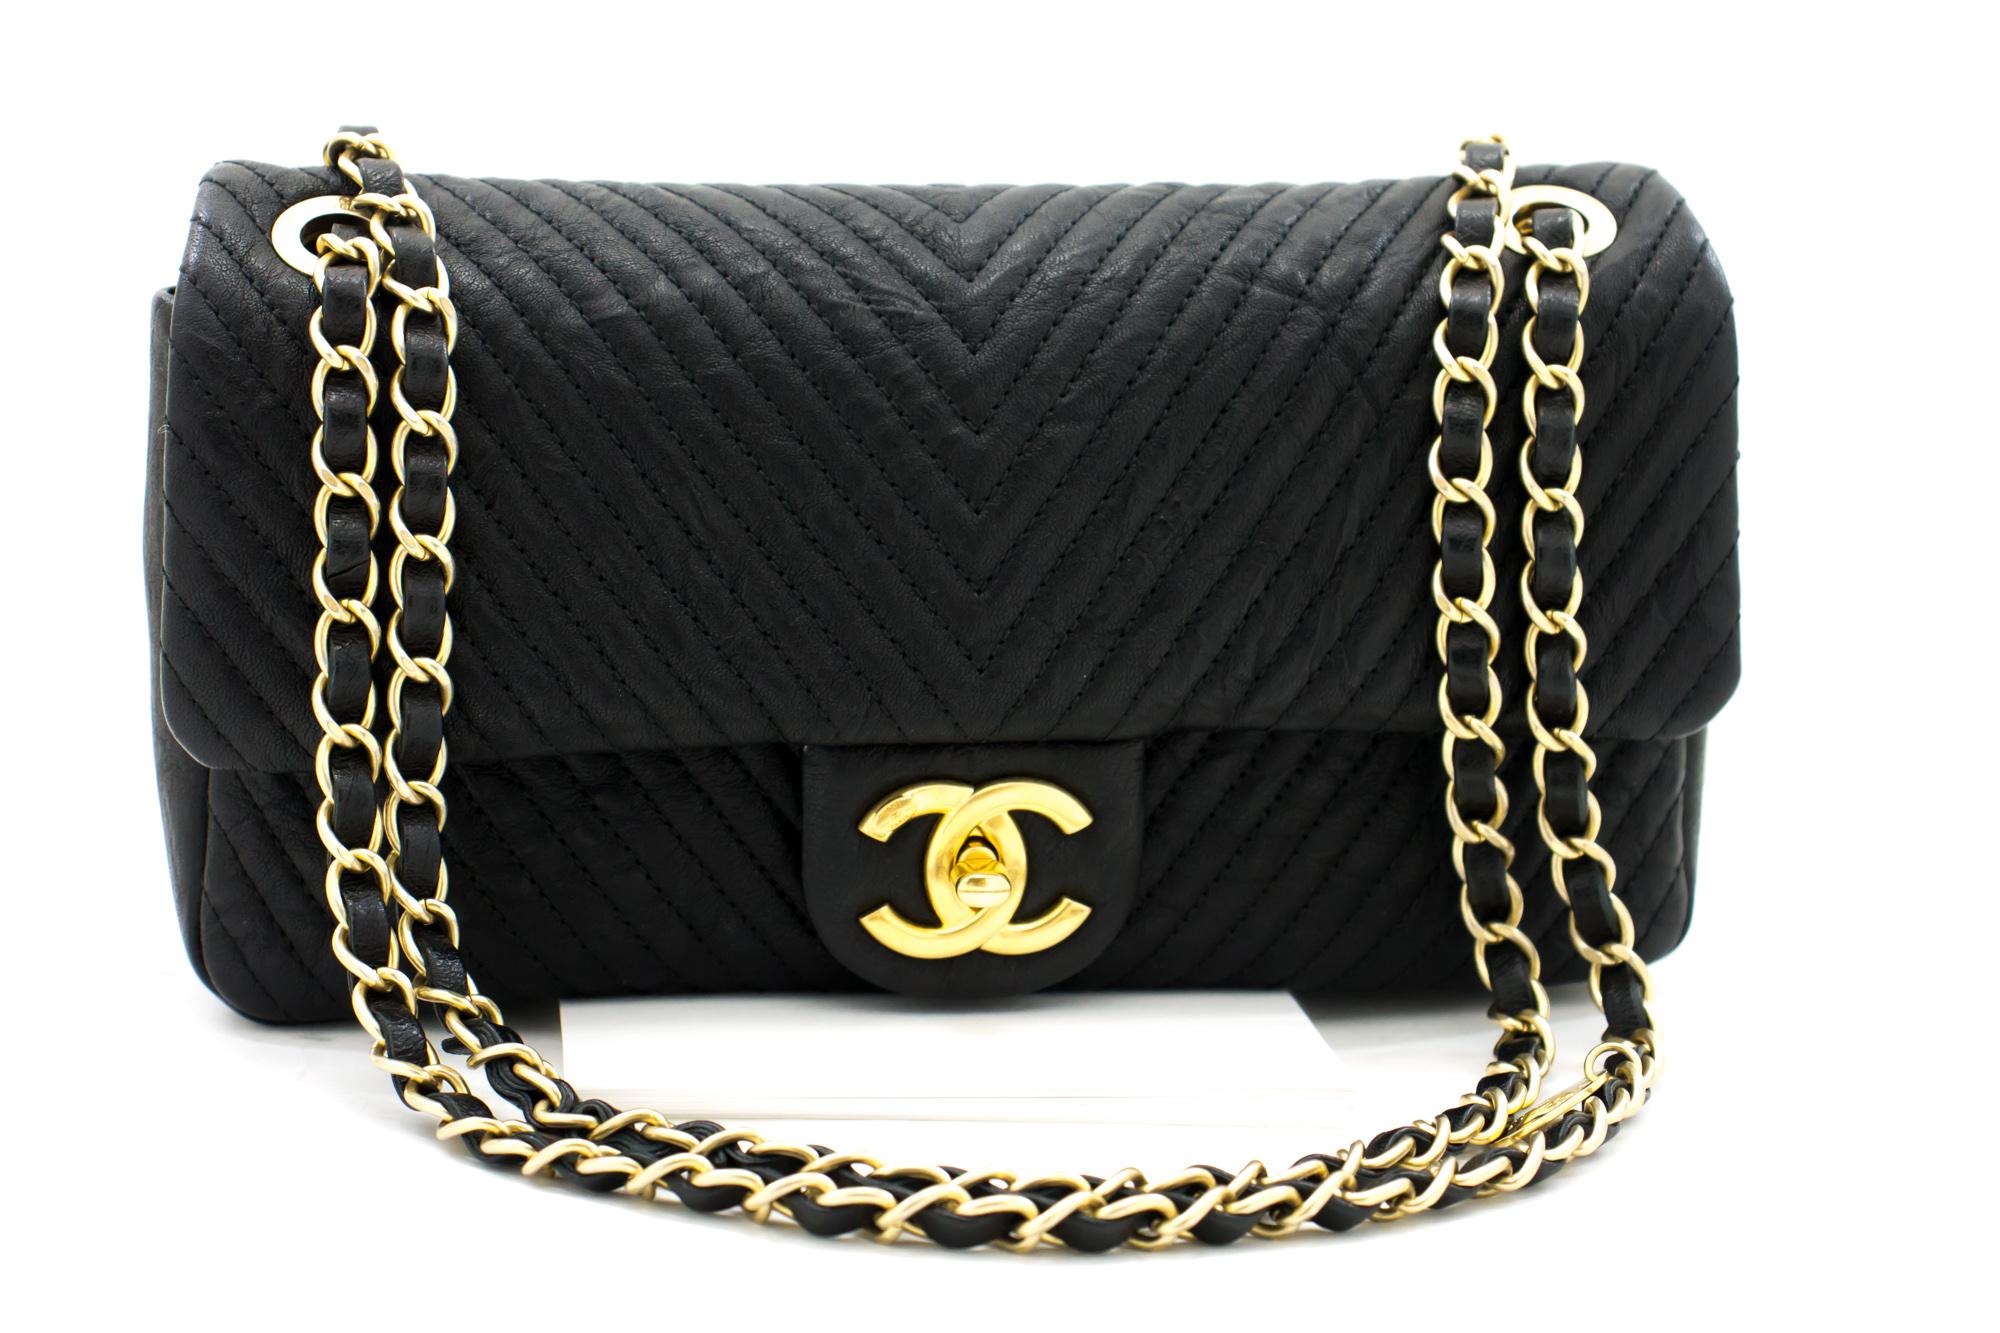 An authentic Chanel 2015 Chevron V-Stitch Leather Chain Flap Shoulder Bag. The color is Black. The outside material is Leather. The pattern is Solid. This item is Contemporary. The year of manufacture would be 2015.
Conditions & Ratings
Outside